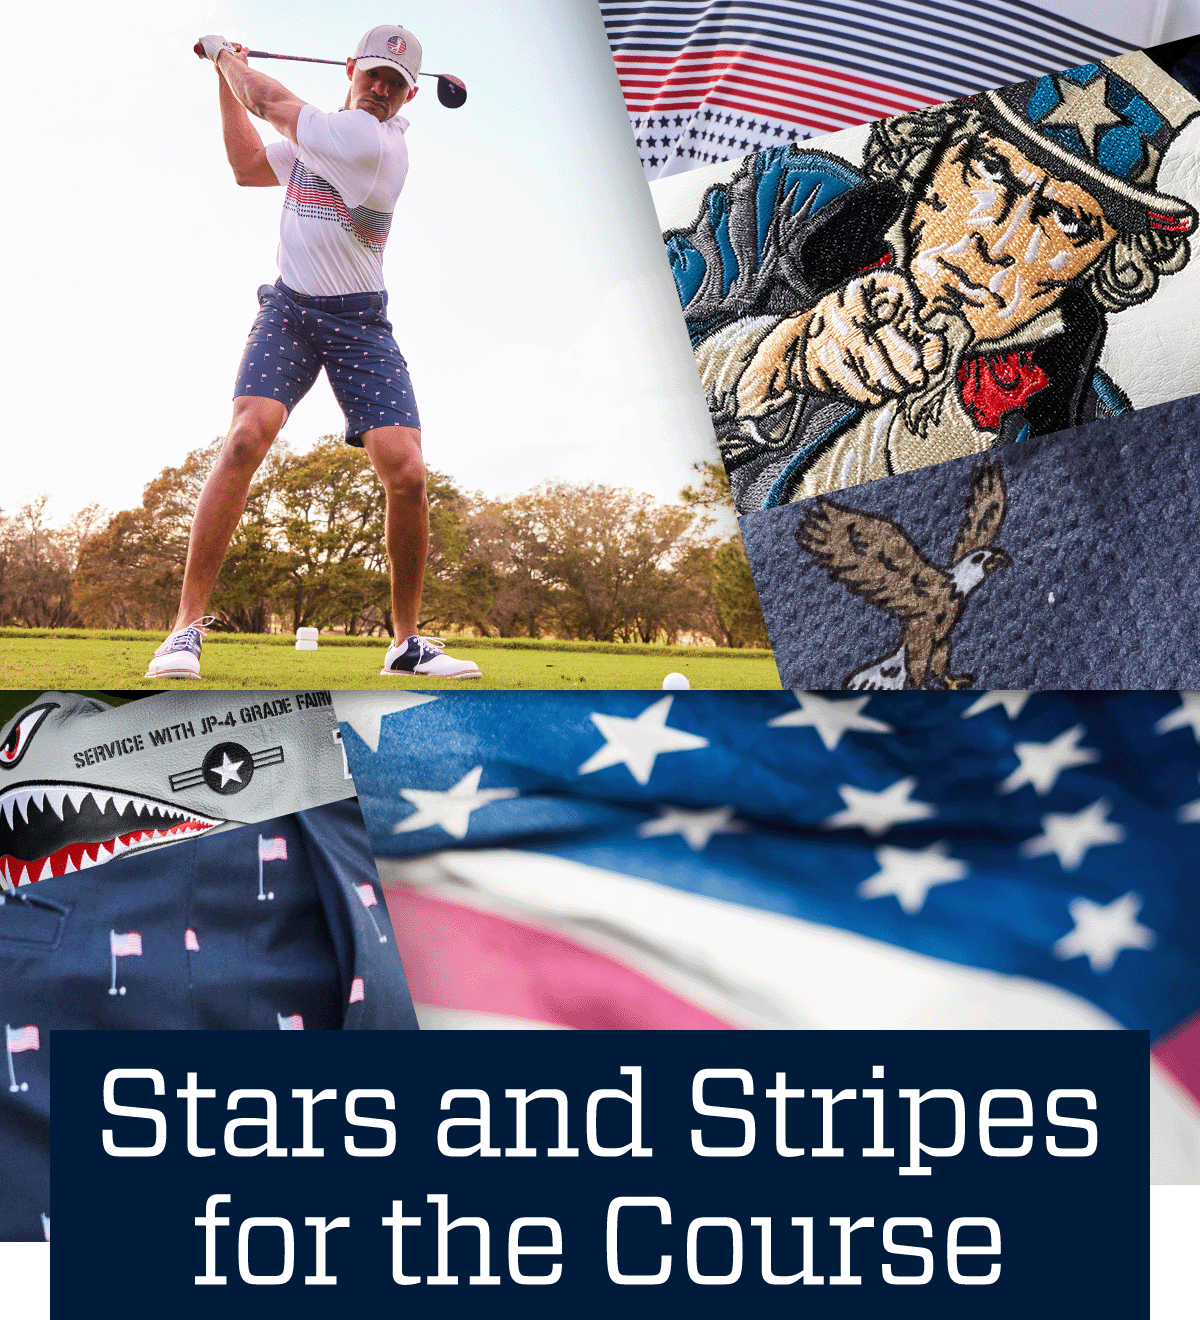  Stars and stripes for the course.